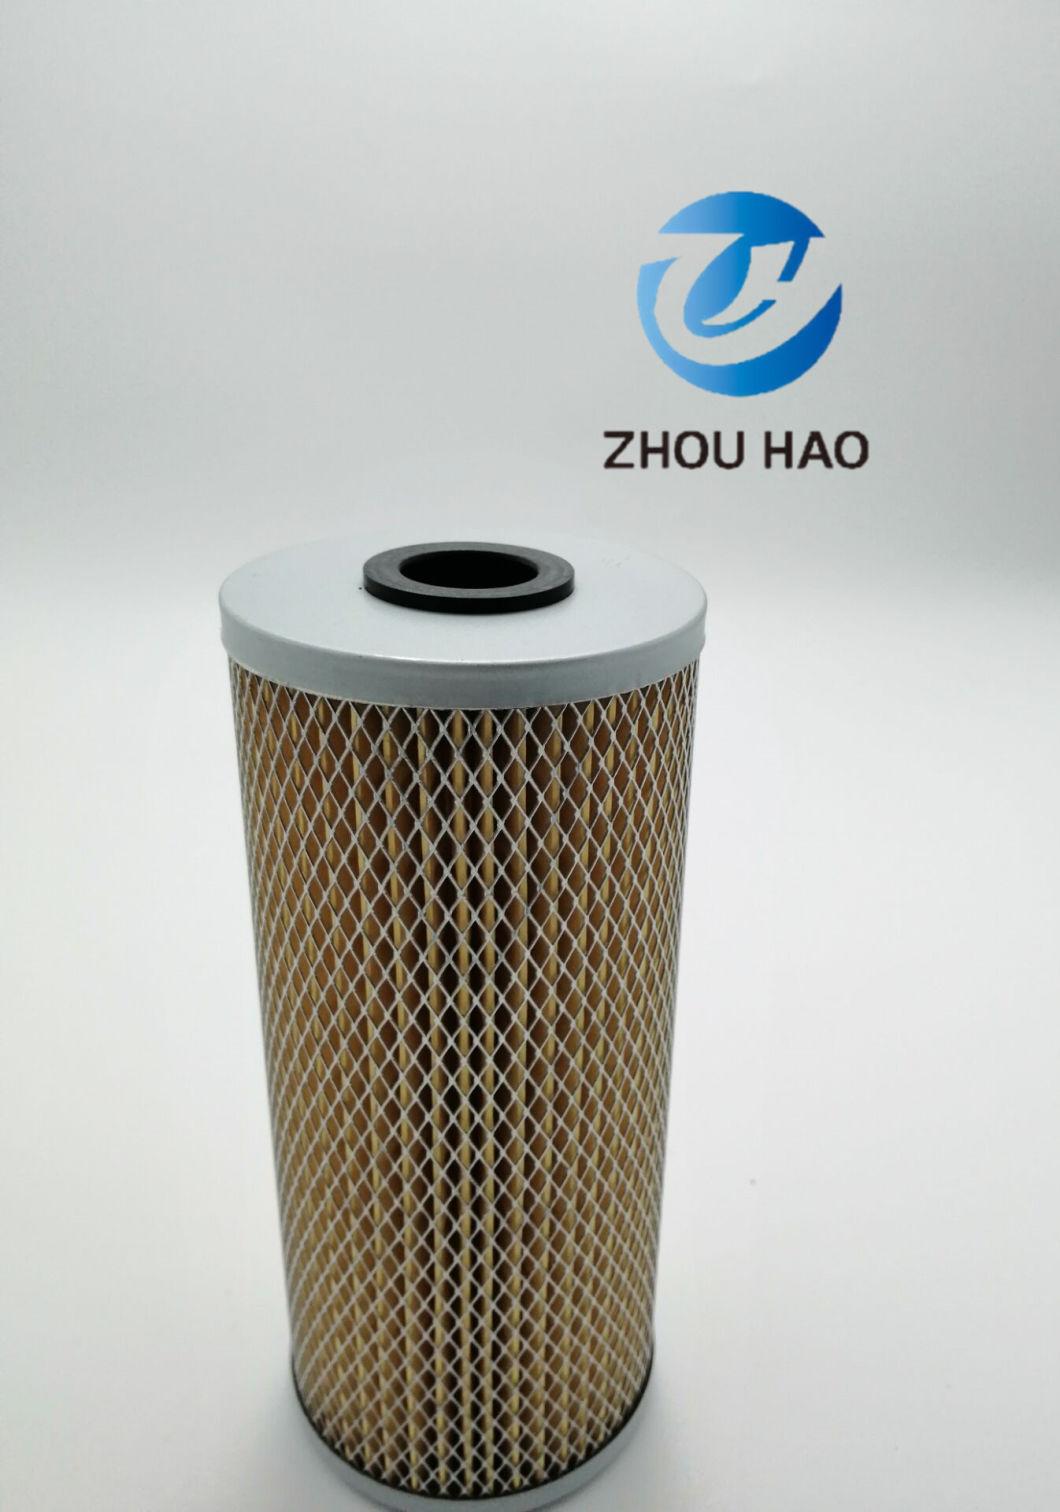 Use for Benz Favorable Price 0011844225 /3661840125 /Ox137D /Hu947/1X China Factory Auto Parts for Oil Filter